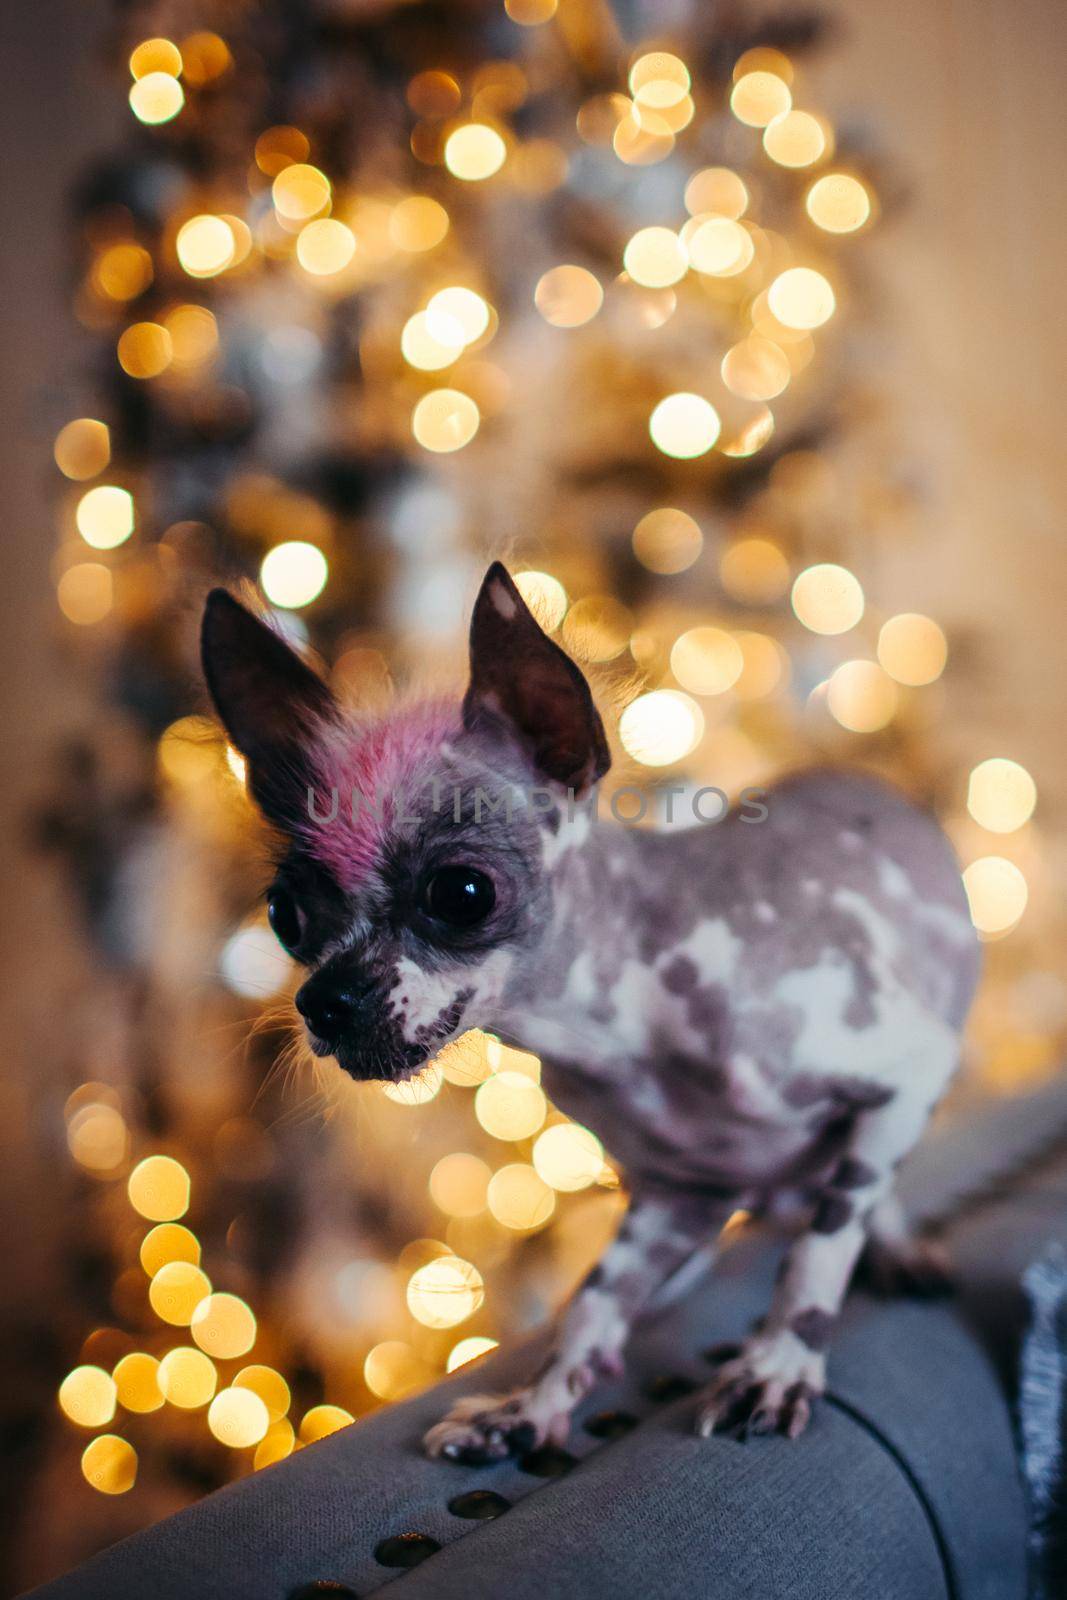 Peruvian hairless and chihuahua mix dog in festivaly decorated room with Christmass tree by RosaJay